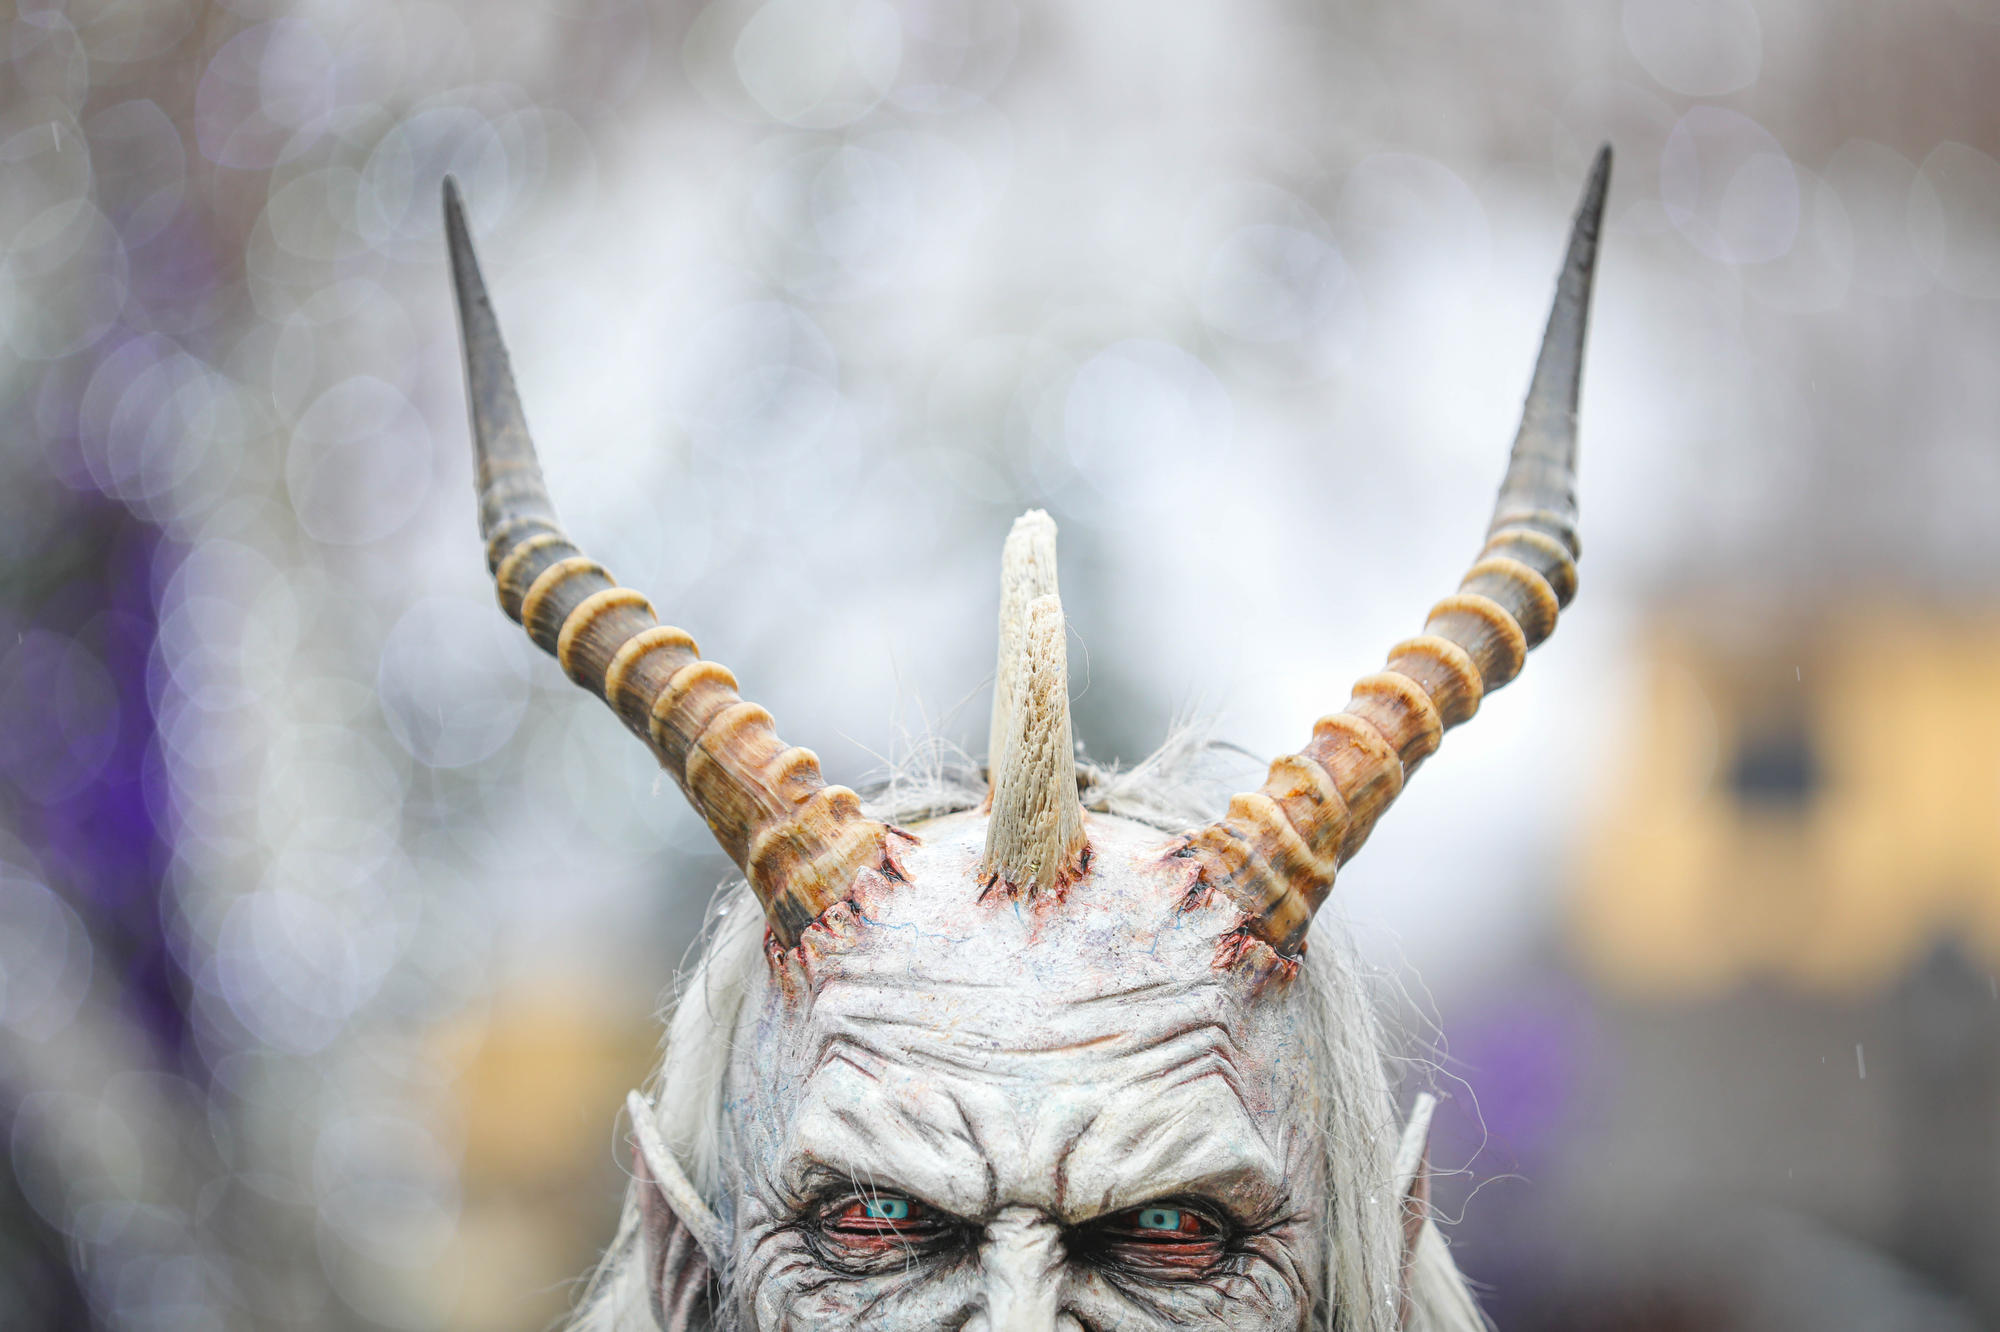 A white Krampus creature's eyes, head and horns rise above the bottom of the frame